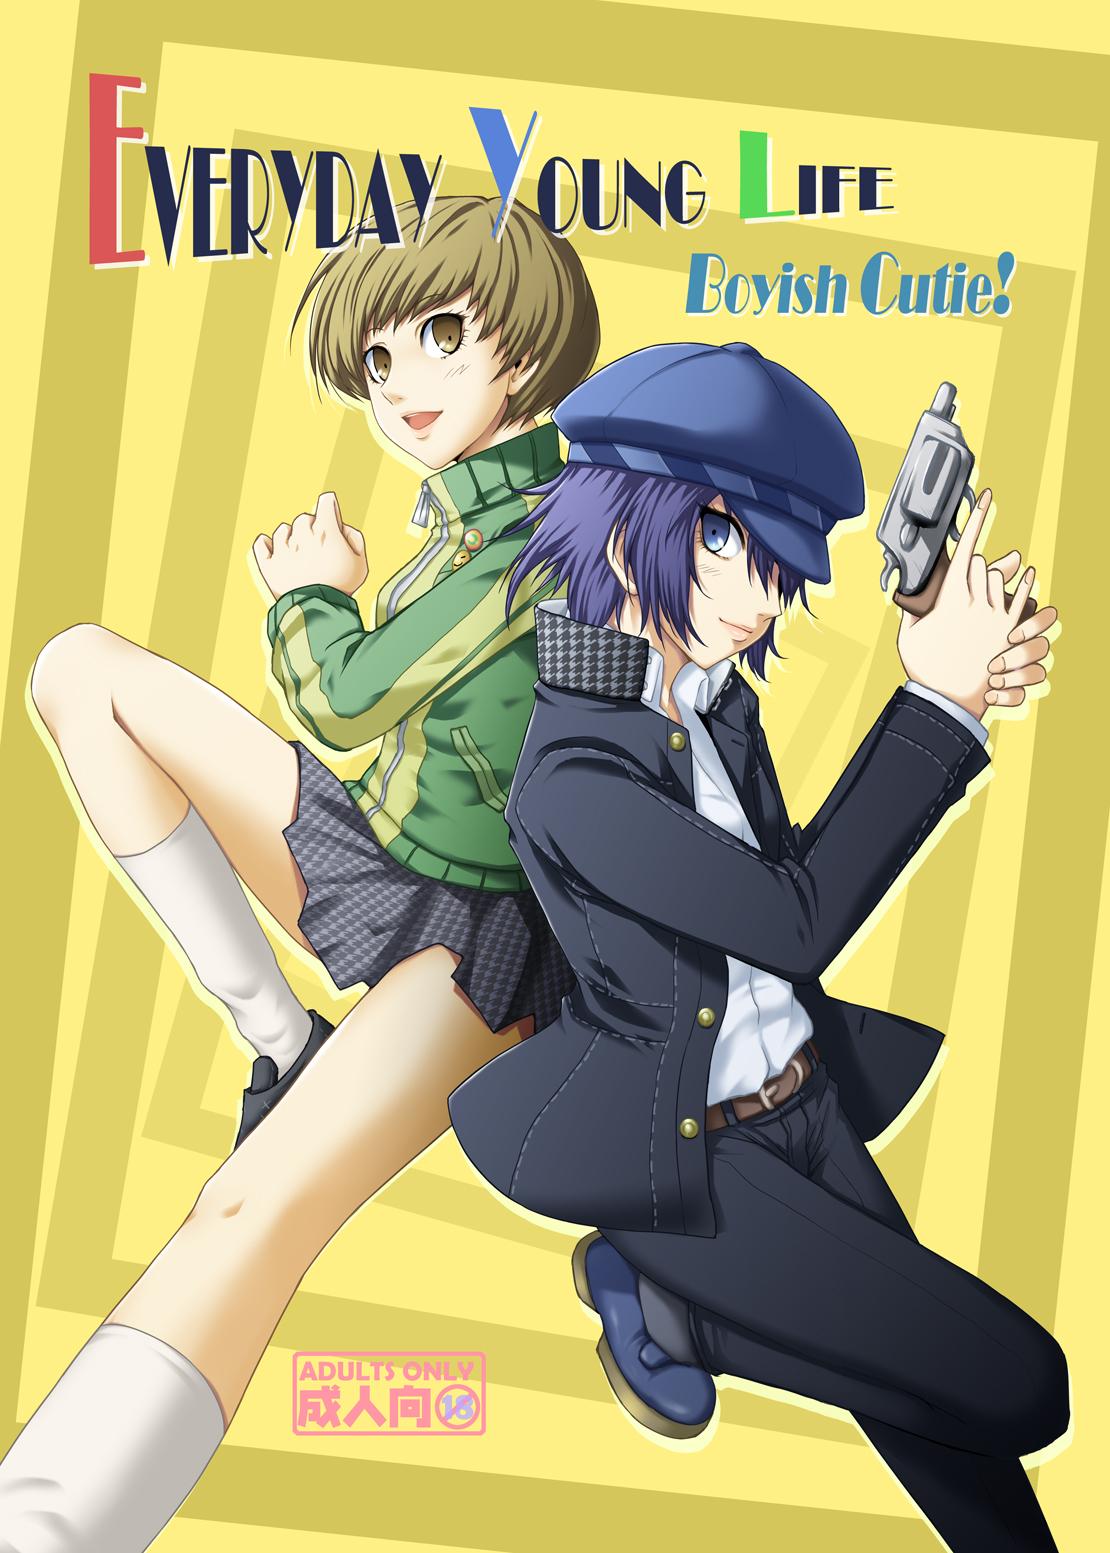 Peludo EVERYDAY YOUNG LIFE - Persona 4 Hardcorend - Picture 1